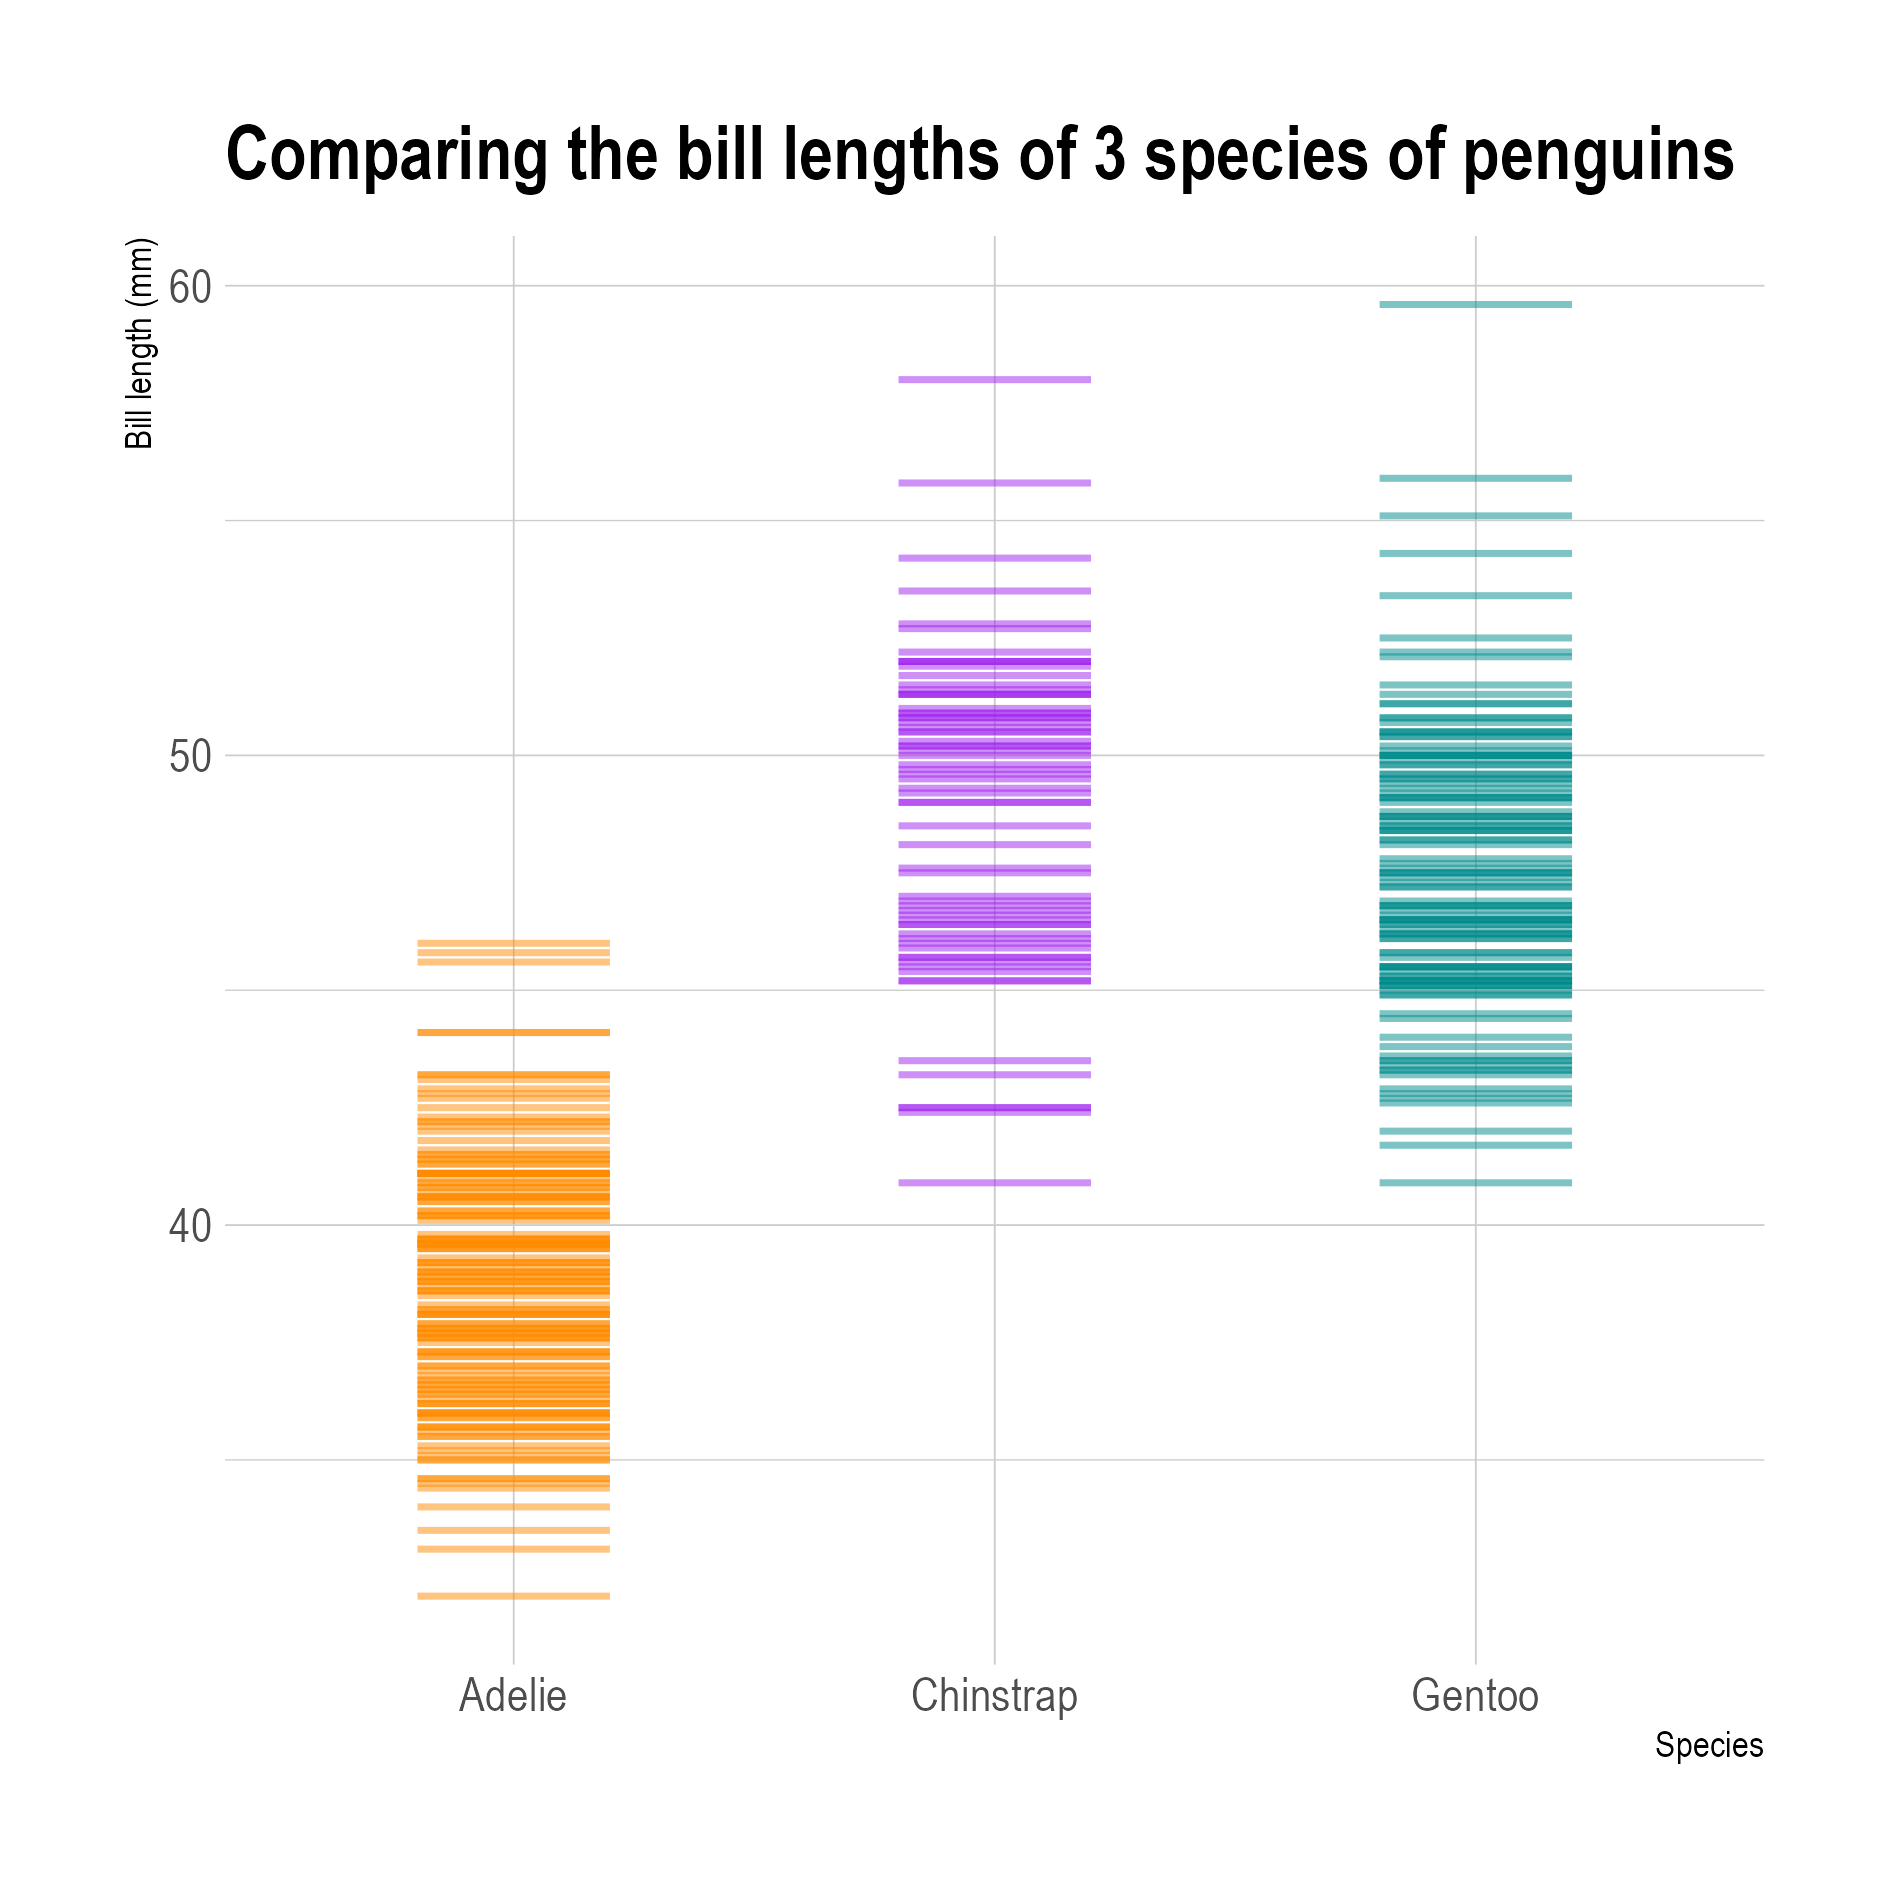 A strip plot showing the distribution of 3 species of penguins